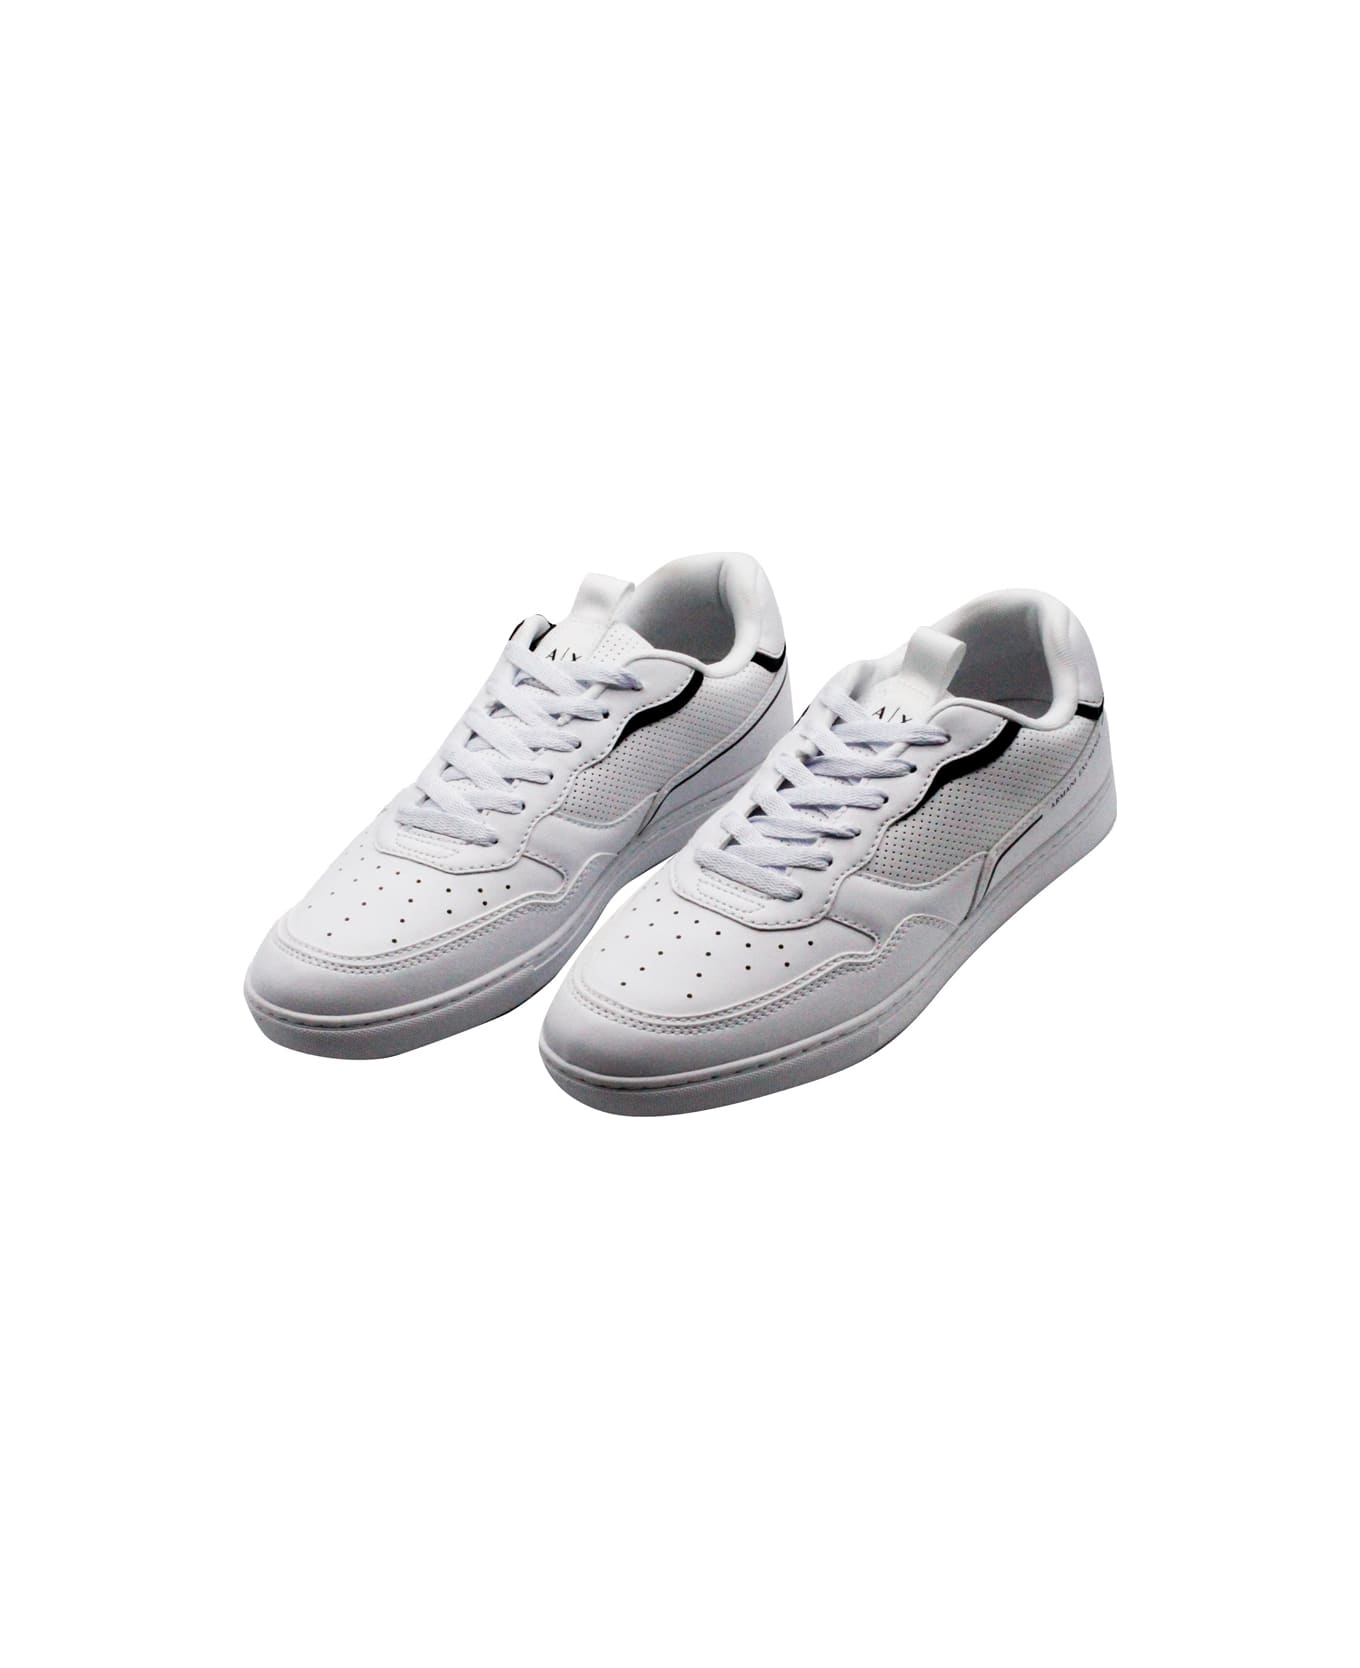 Armani Collezioni Sneakers In Soft Perforated Leather With Matching Sole And Lace Closure. Rear Logo - White スニーカー